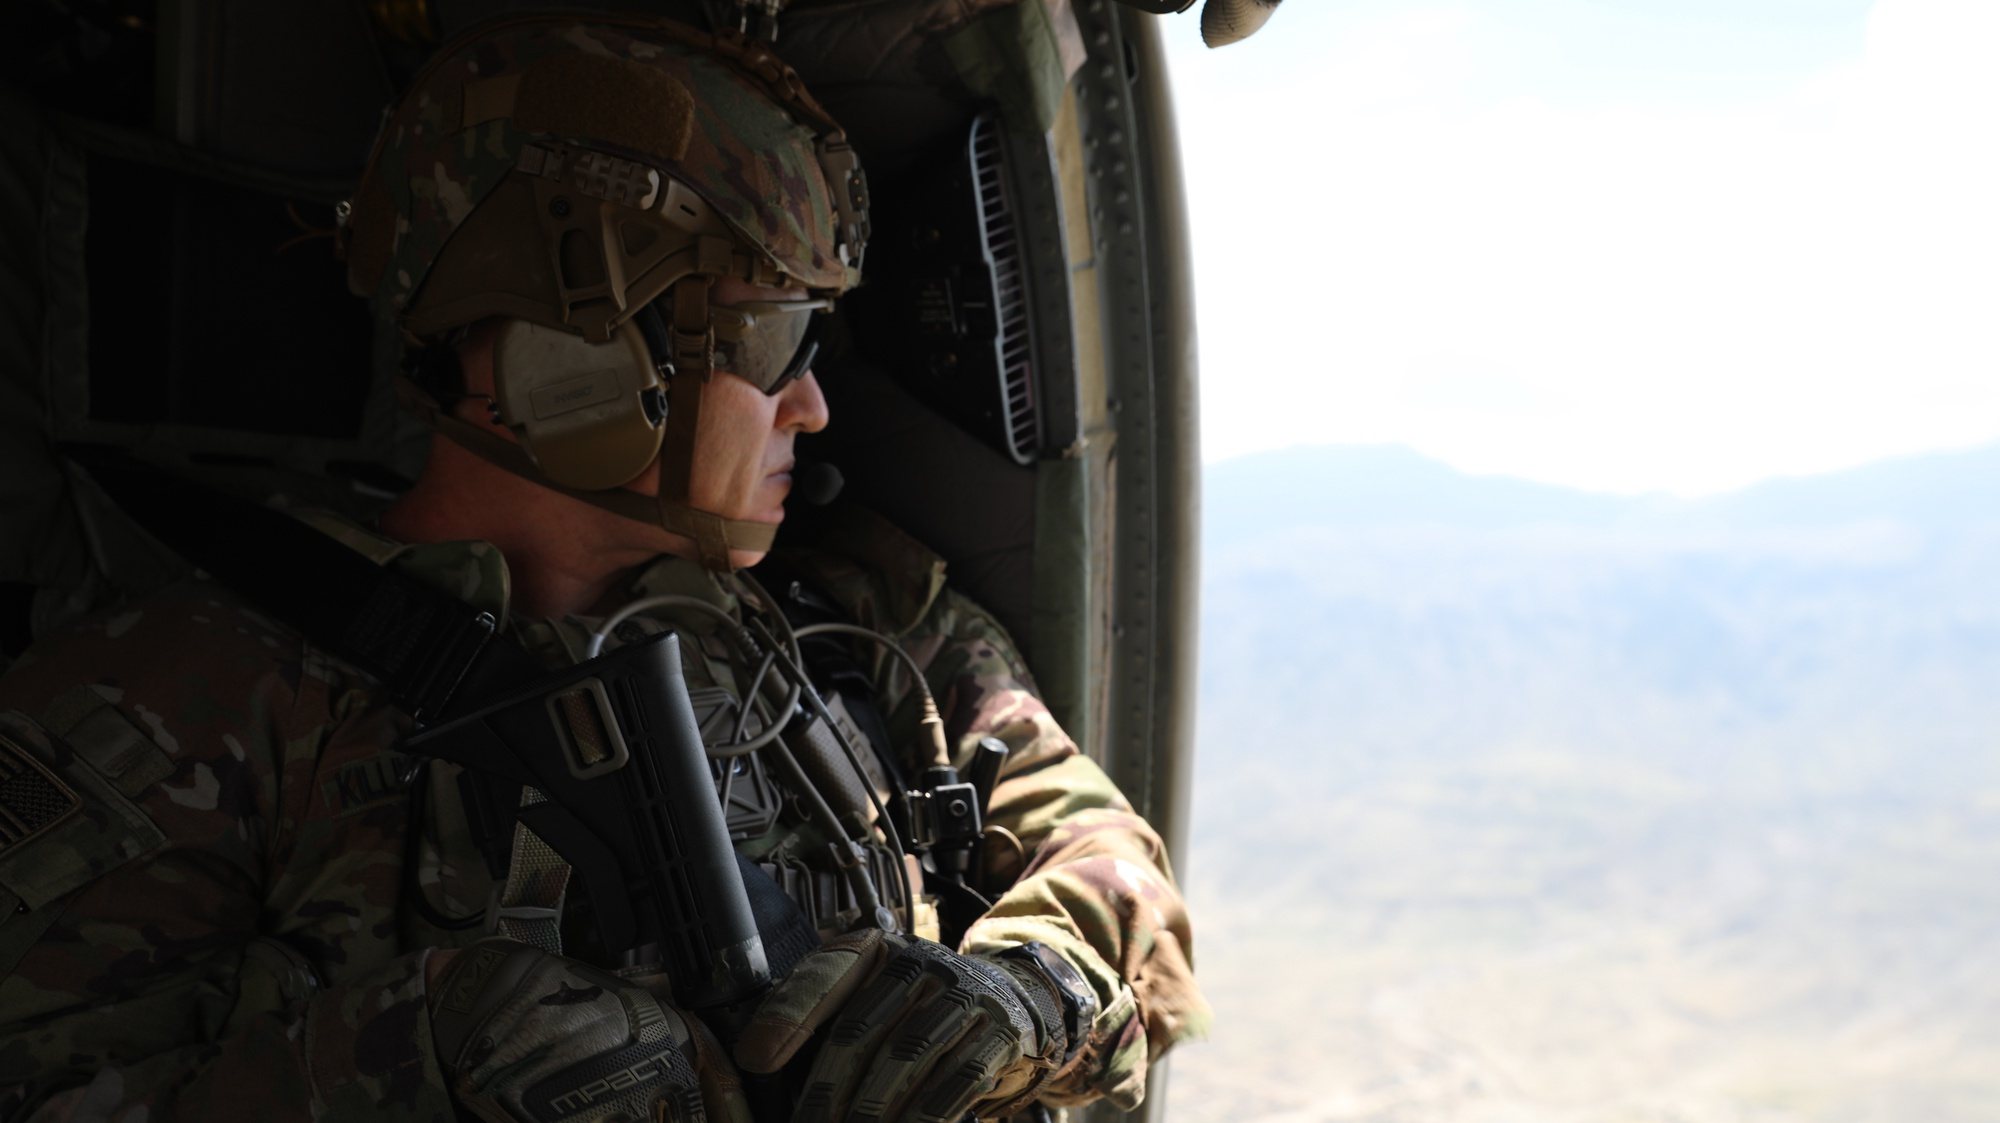 epa07832233 A handout photo made available by the US Army shows an advisor from the 2nd Security Force Assistance Brigade flying during their deployment to Afghanistan, 12 April 2019 (issued 10 September 2019). Media reports quoting US officials state that the US military is likely to ramp up its operations in Afghanistan following Washington&#039;s suspension of peace talks with the Taliban on 09 September 2019, after the insurgent group kept carrying out high profile attacks in the country, including one that recently killed a US soldier. The Taliban on 10 September 2019, pledged to continue fighting against US forces in Afghanistan after President Trump declared peace talks with the group as &#039;dead&#039;, media added.  EPA/SGT. JORDAN TRENT/US ARMY HANDOUT  HANDOUT EDITORIAL USE ONLY/NO SALES